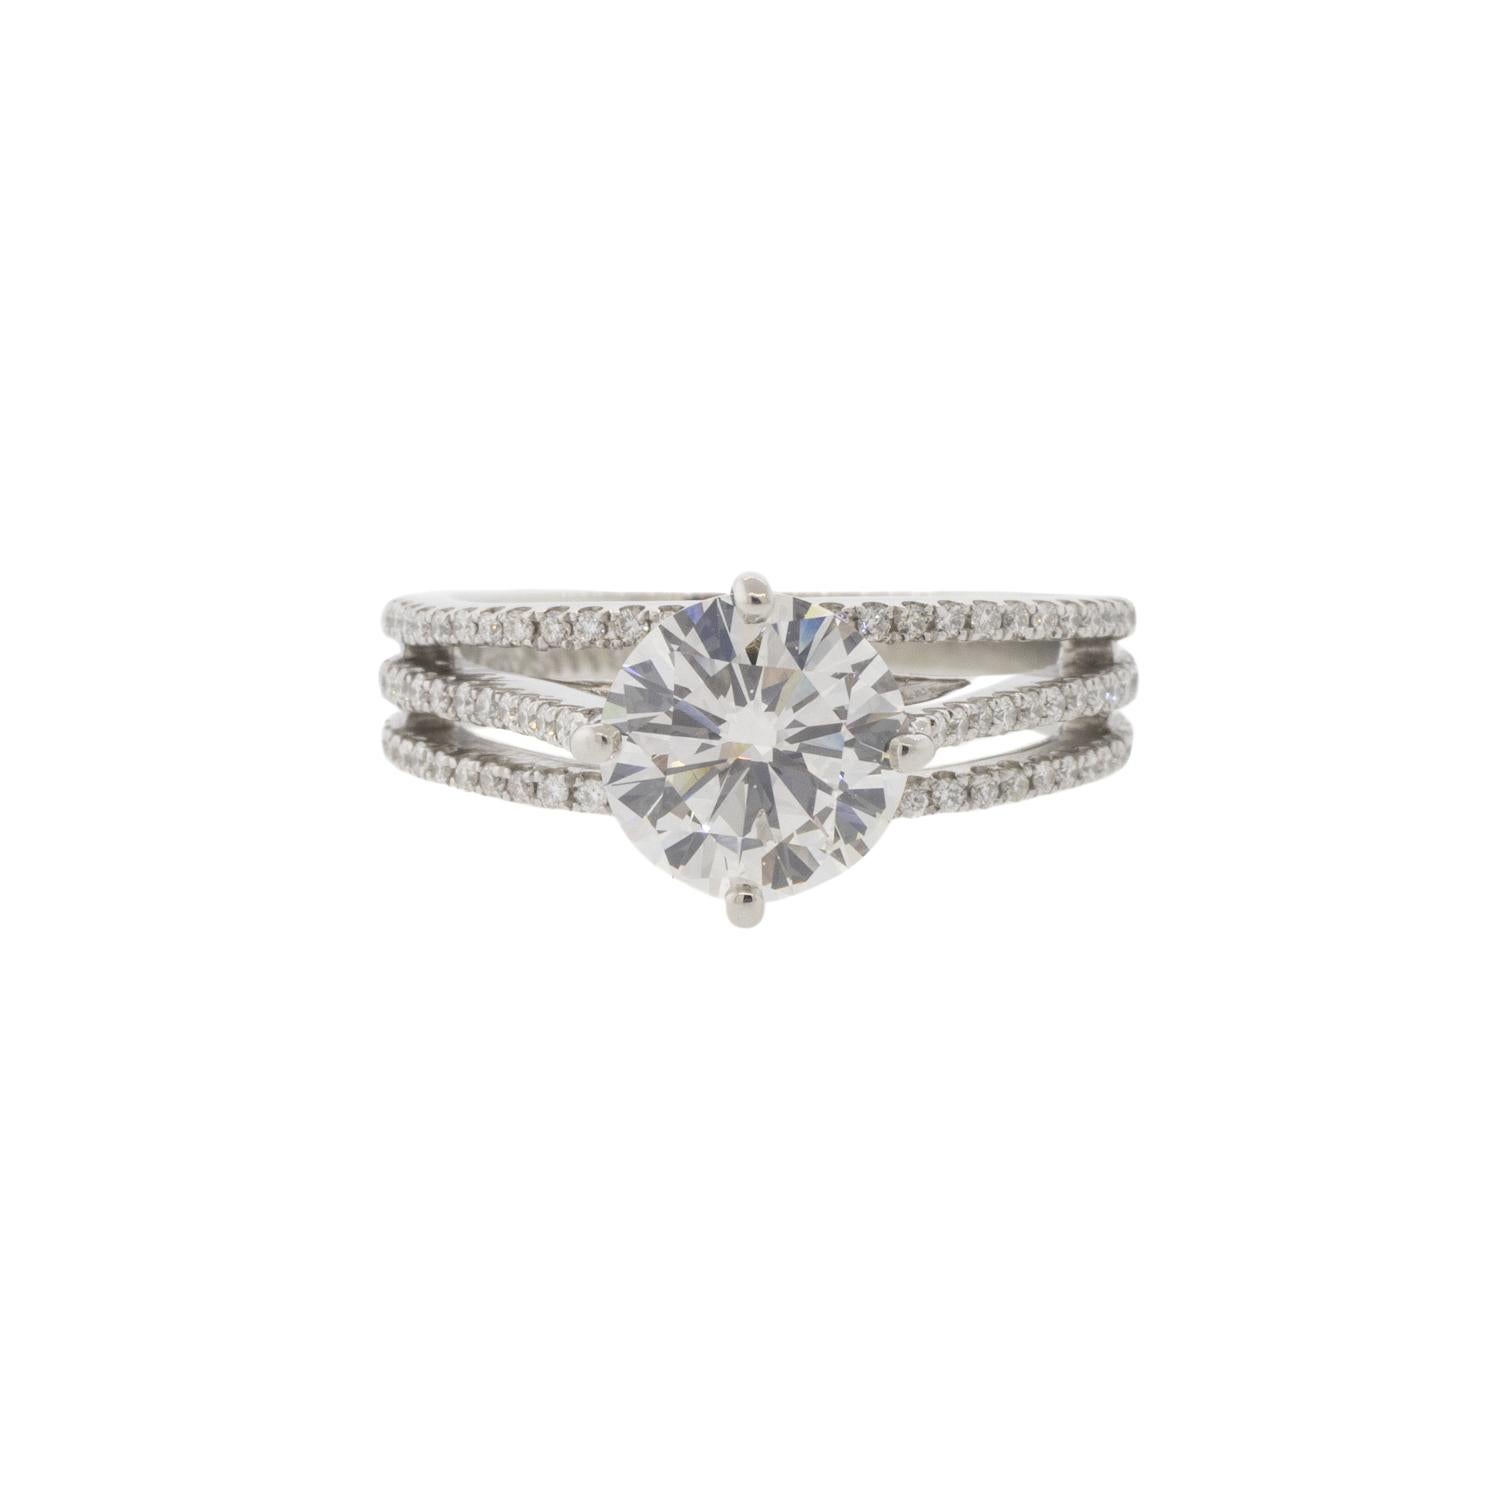 An absolute stunner, this split shank engagement ring has three bands adorned with diamonds. The center stone is a GIA certified 1.80ct I/VS2 natural round brilliant cut diamond. There are .60ctw of G-H/VS2-SI1 round brilliant natural diamonds